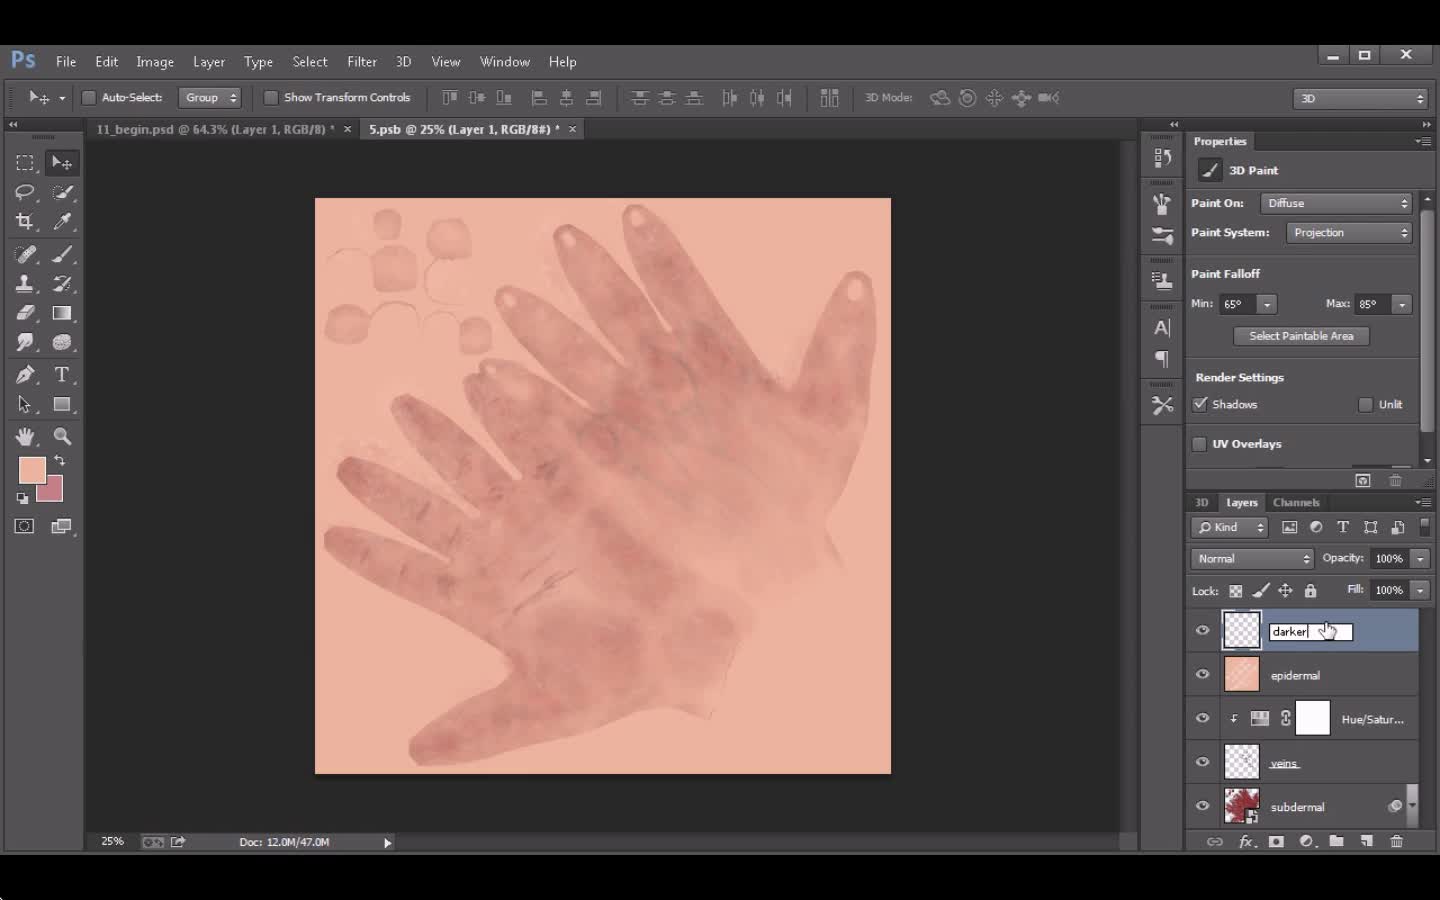 Eddie Russell - Painting Realistic 3D Skin Textures in Photoshop: Hands